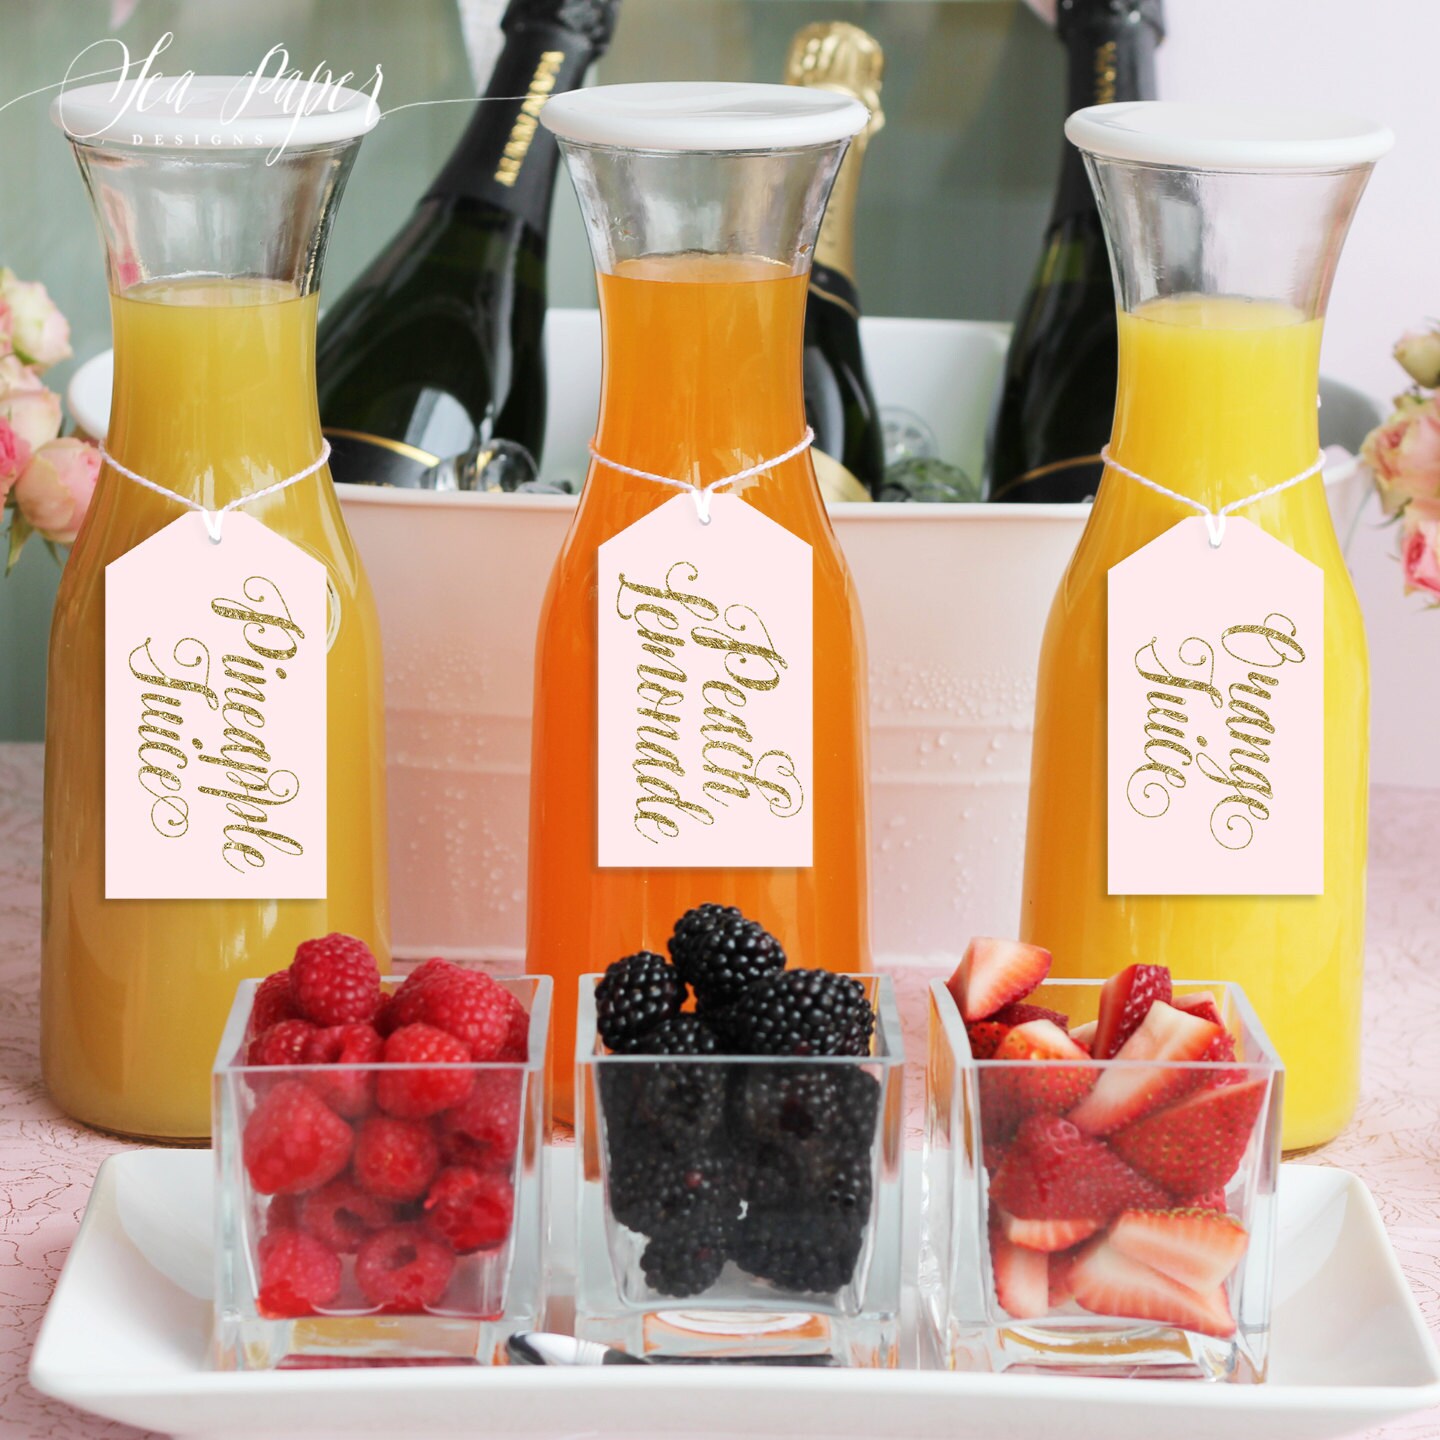 PRESTIGE Mimosa Bar Kit - Glass Carafe with Lids 27oz & Brunch Decor,  Mimosa Pitcher w/Plastic Carafe Lid, Bubbly Juice Carafes for Mimosa Bar